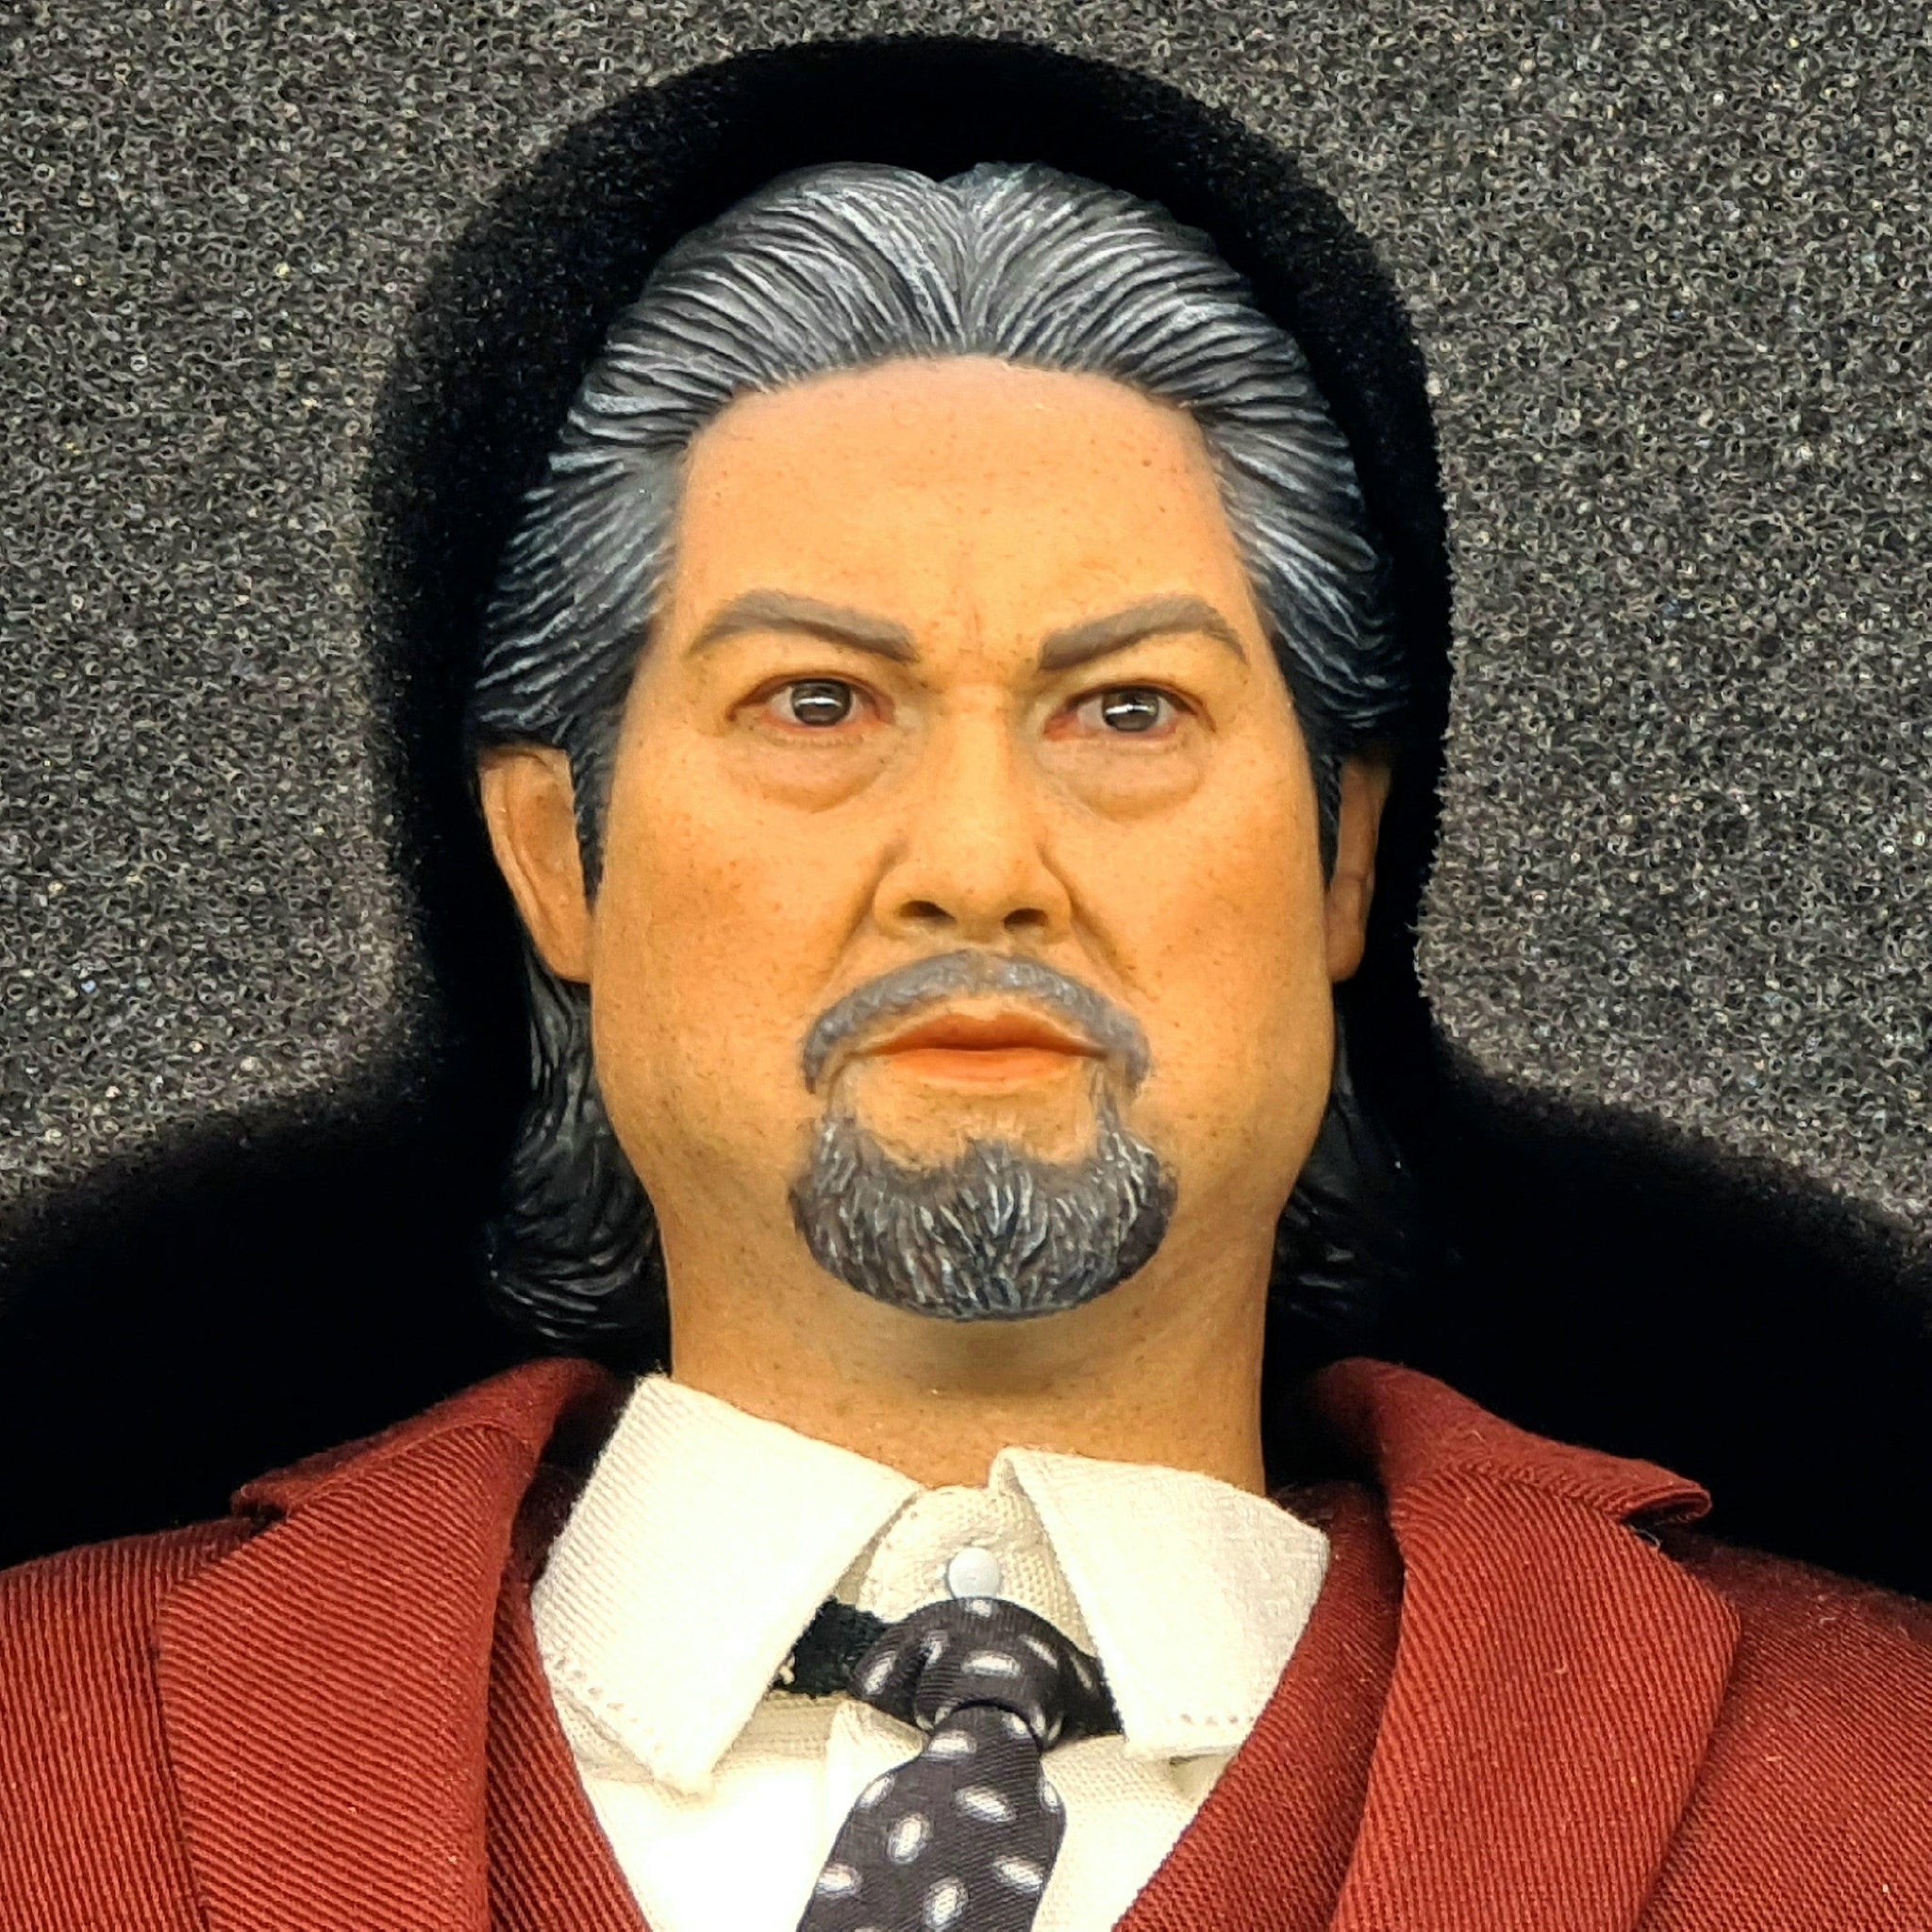 Accessories Model for End I Toys EIT013 Kill Zone Sammo Hung Kam-po 1/6th  Scale 12 Action Figure 1:6 In Stock New